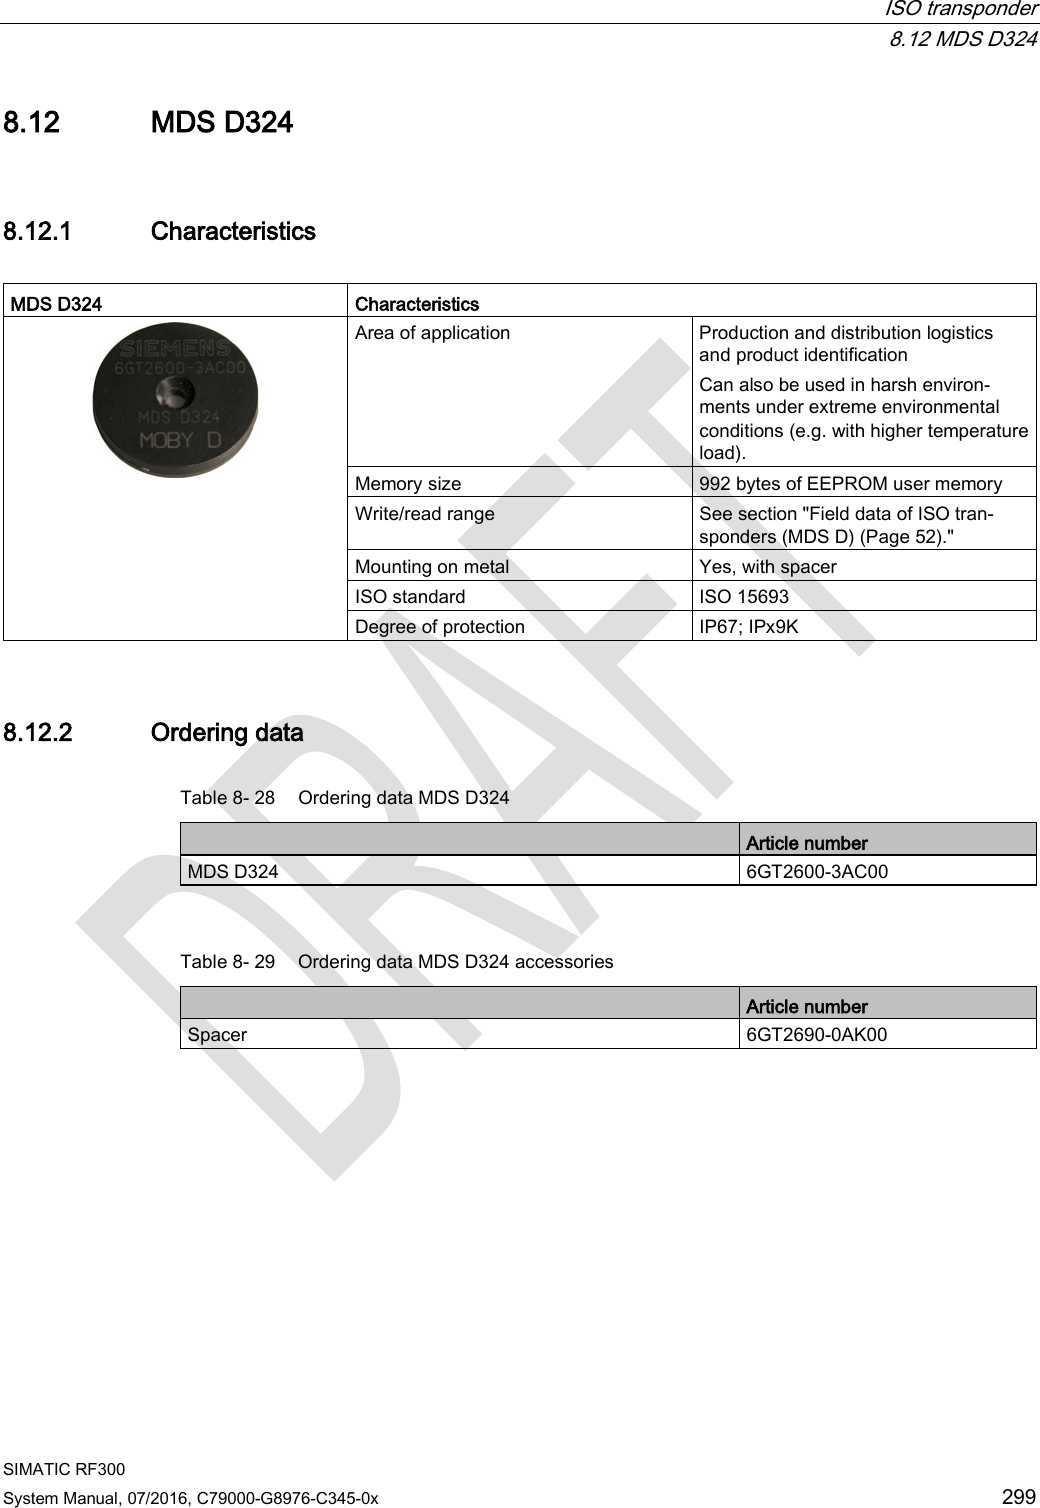  ISO transponder  8.12 MDS D324 SIMATIC RF300 System Manual, 07/2016, C79000-G8976-C345-0x 299 8.12 MDS D324 8.12.1 Characteristics  MDS D324 Characteristics  Area of application Production and distribution logistics and product identification Can also be used in harsh environ-ments under extreme environmental conditions (e.g. with higher temperature load). Memory size 992 bytes of EEPROM user memory Write/read range See section &quot;Field data of ISO tran-sponders (MDS D) (Page 52).&quot; Mounting on metal Yes, with spacer ISO standard ISO 15693 Degree of protection IP67; IPx9K 8.12.2 Ordering data Table 8- 28  Ordering data MDS D324  Article number MDS D324 6GT2600-3AC00  Table 8- 29 Ordering data MDS D324 accessories  Article number Spacer 6GT2690-0AK00 